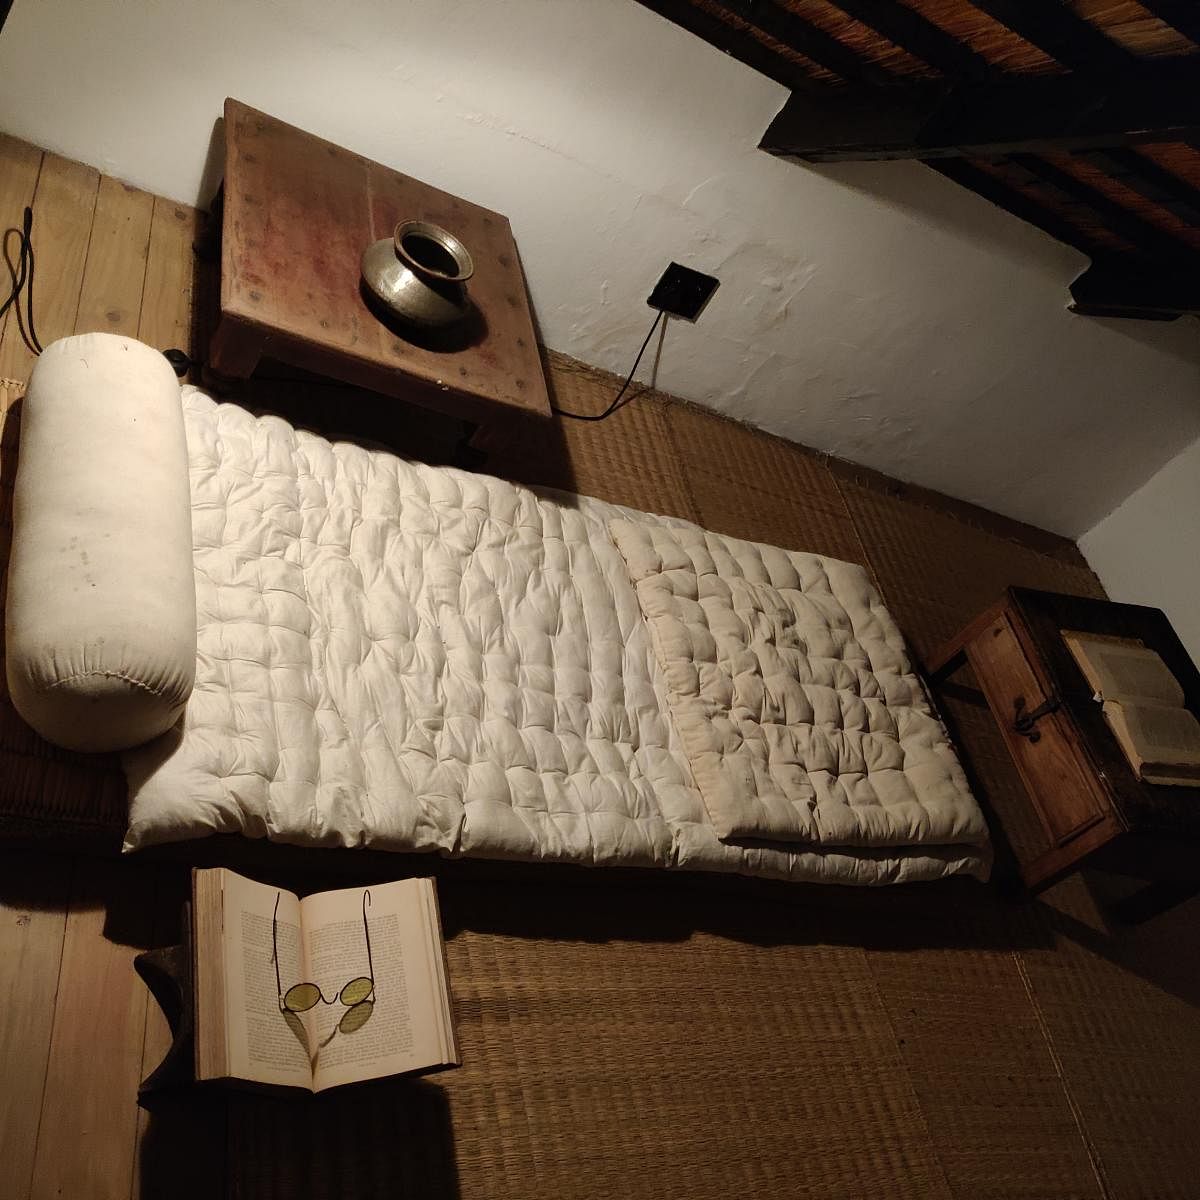 A recreation of the Mahatma's sleeping quarters in the attic of the home he shared with Hermann Kallenbach in Johannesburg.